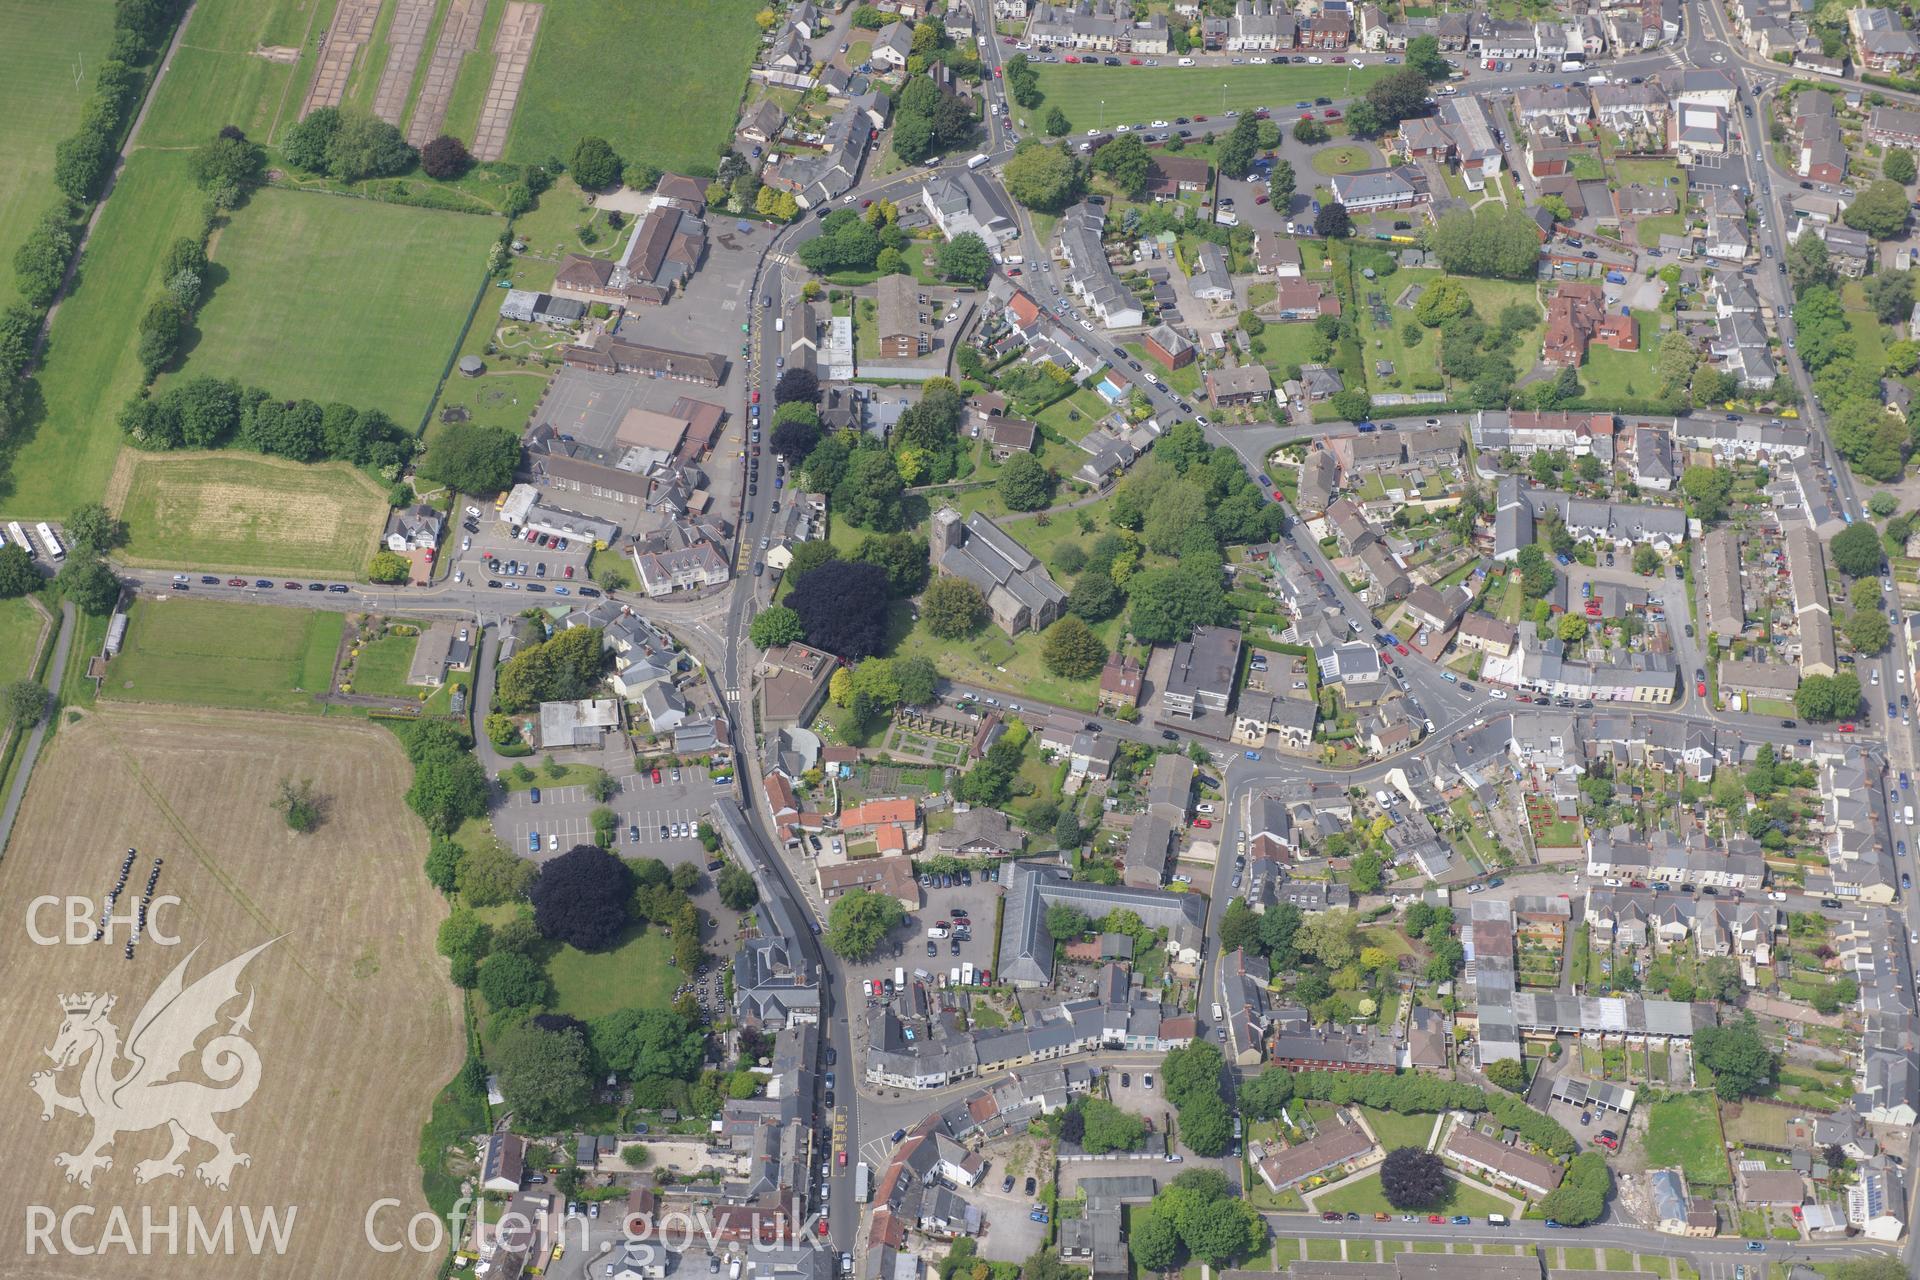 Caerleon town including views of the Roman barracks and St. Cadoc's Church. Oblique aerial photograph taken during the Royal Commission's programme of archaeological aerial reconnaissance by Toby Driver on 11th June 2015.